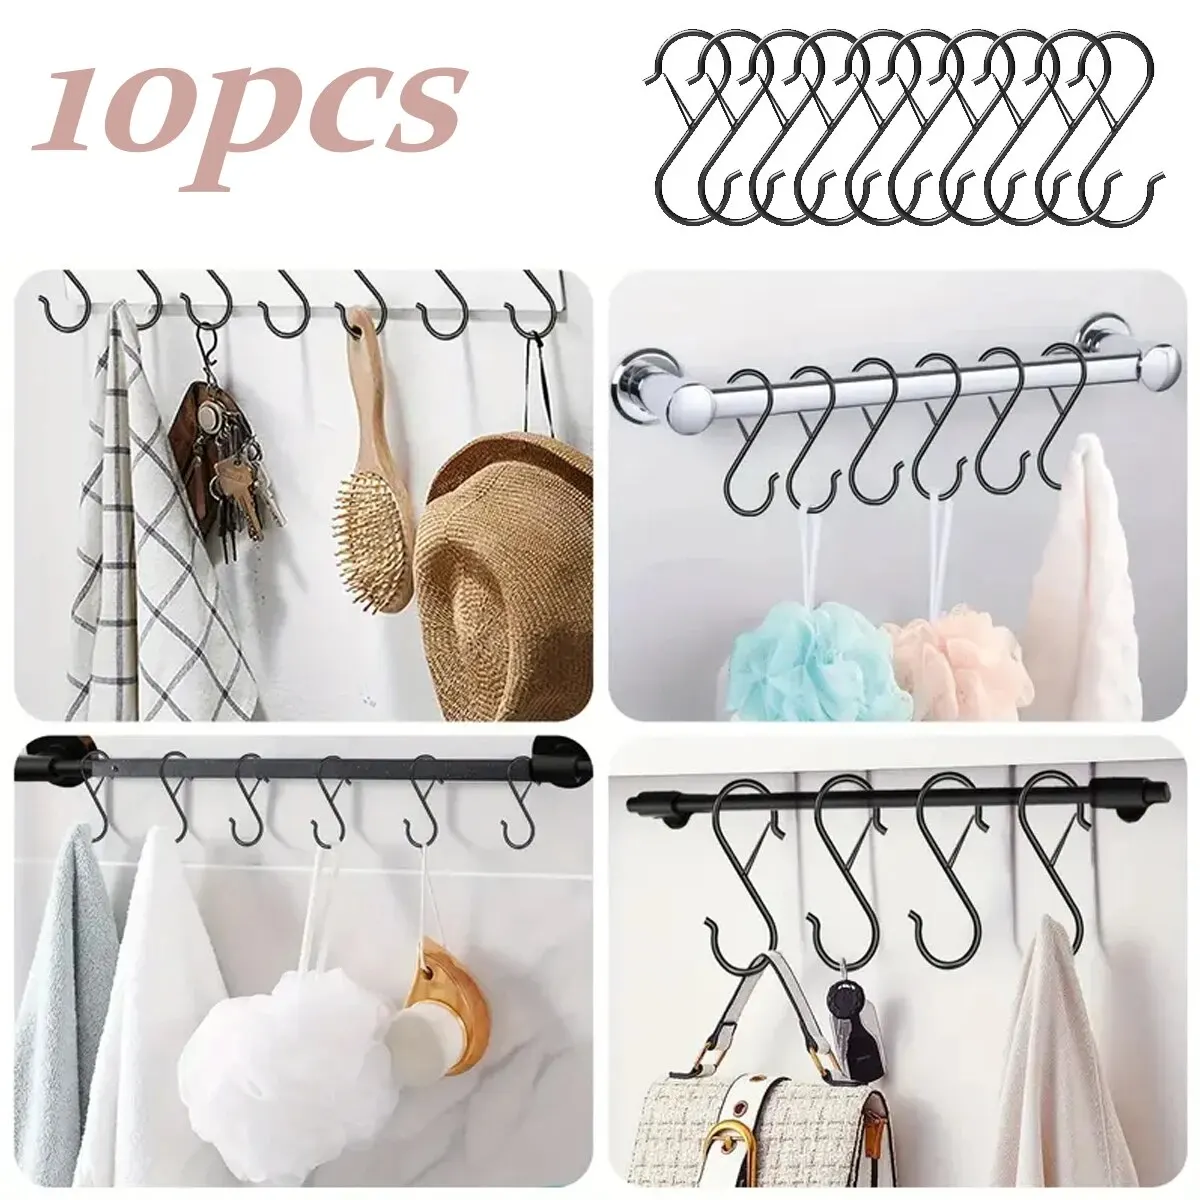 10pcs 3x9cm Metal S Shaped Hook With with Safety Buckle for Hanging Kitchen  Utensils/Plants/Pots & Pans/Clothes, Hats - AliExpress